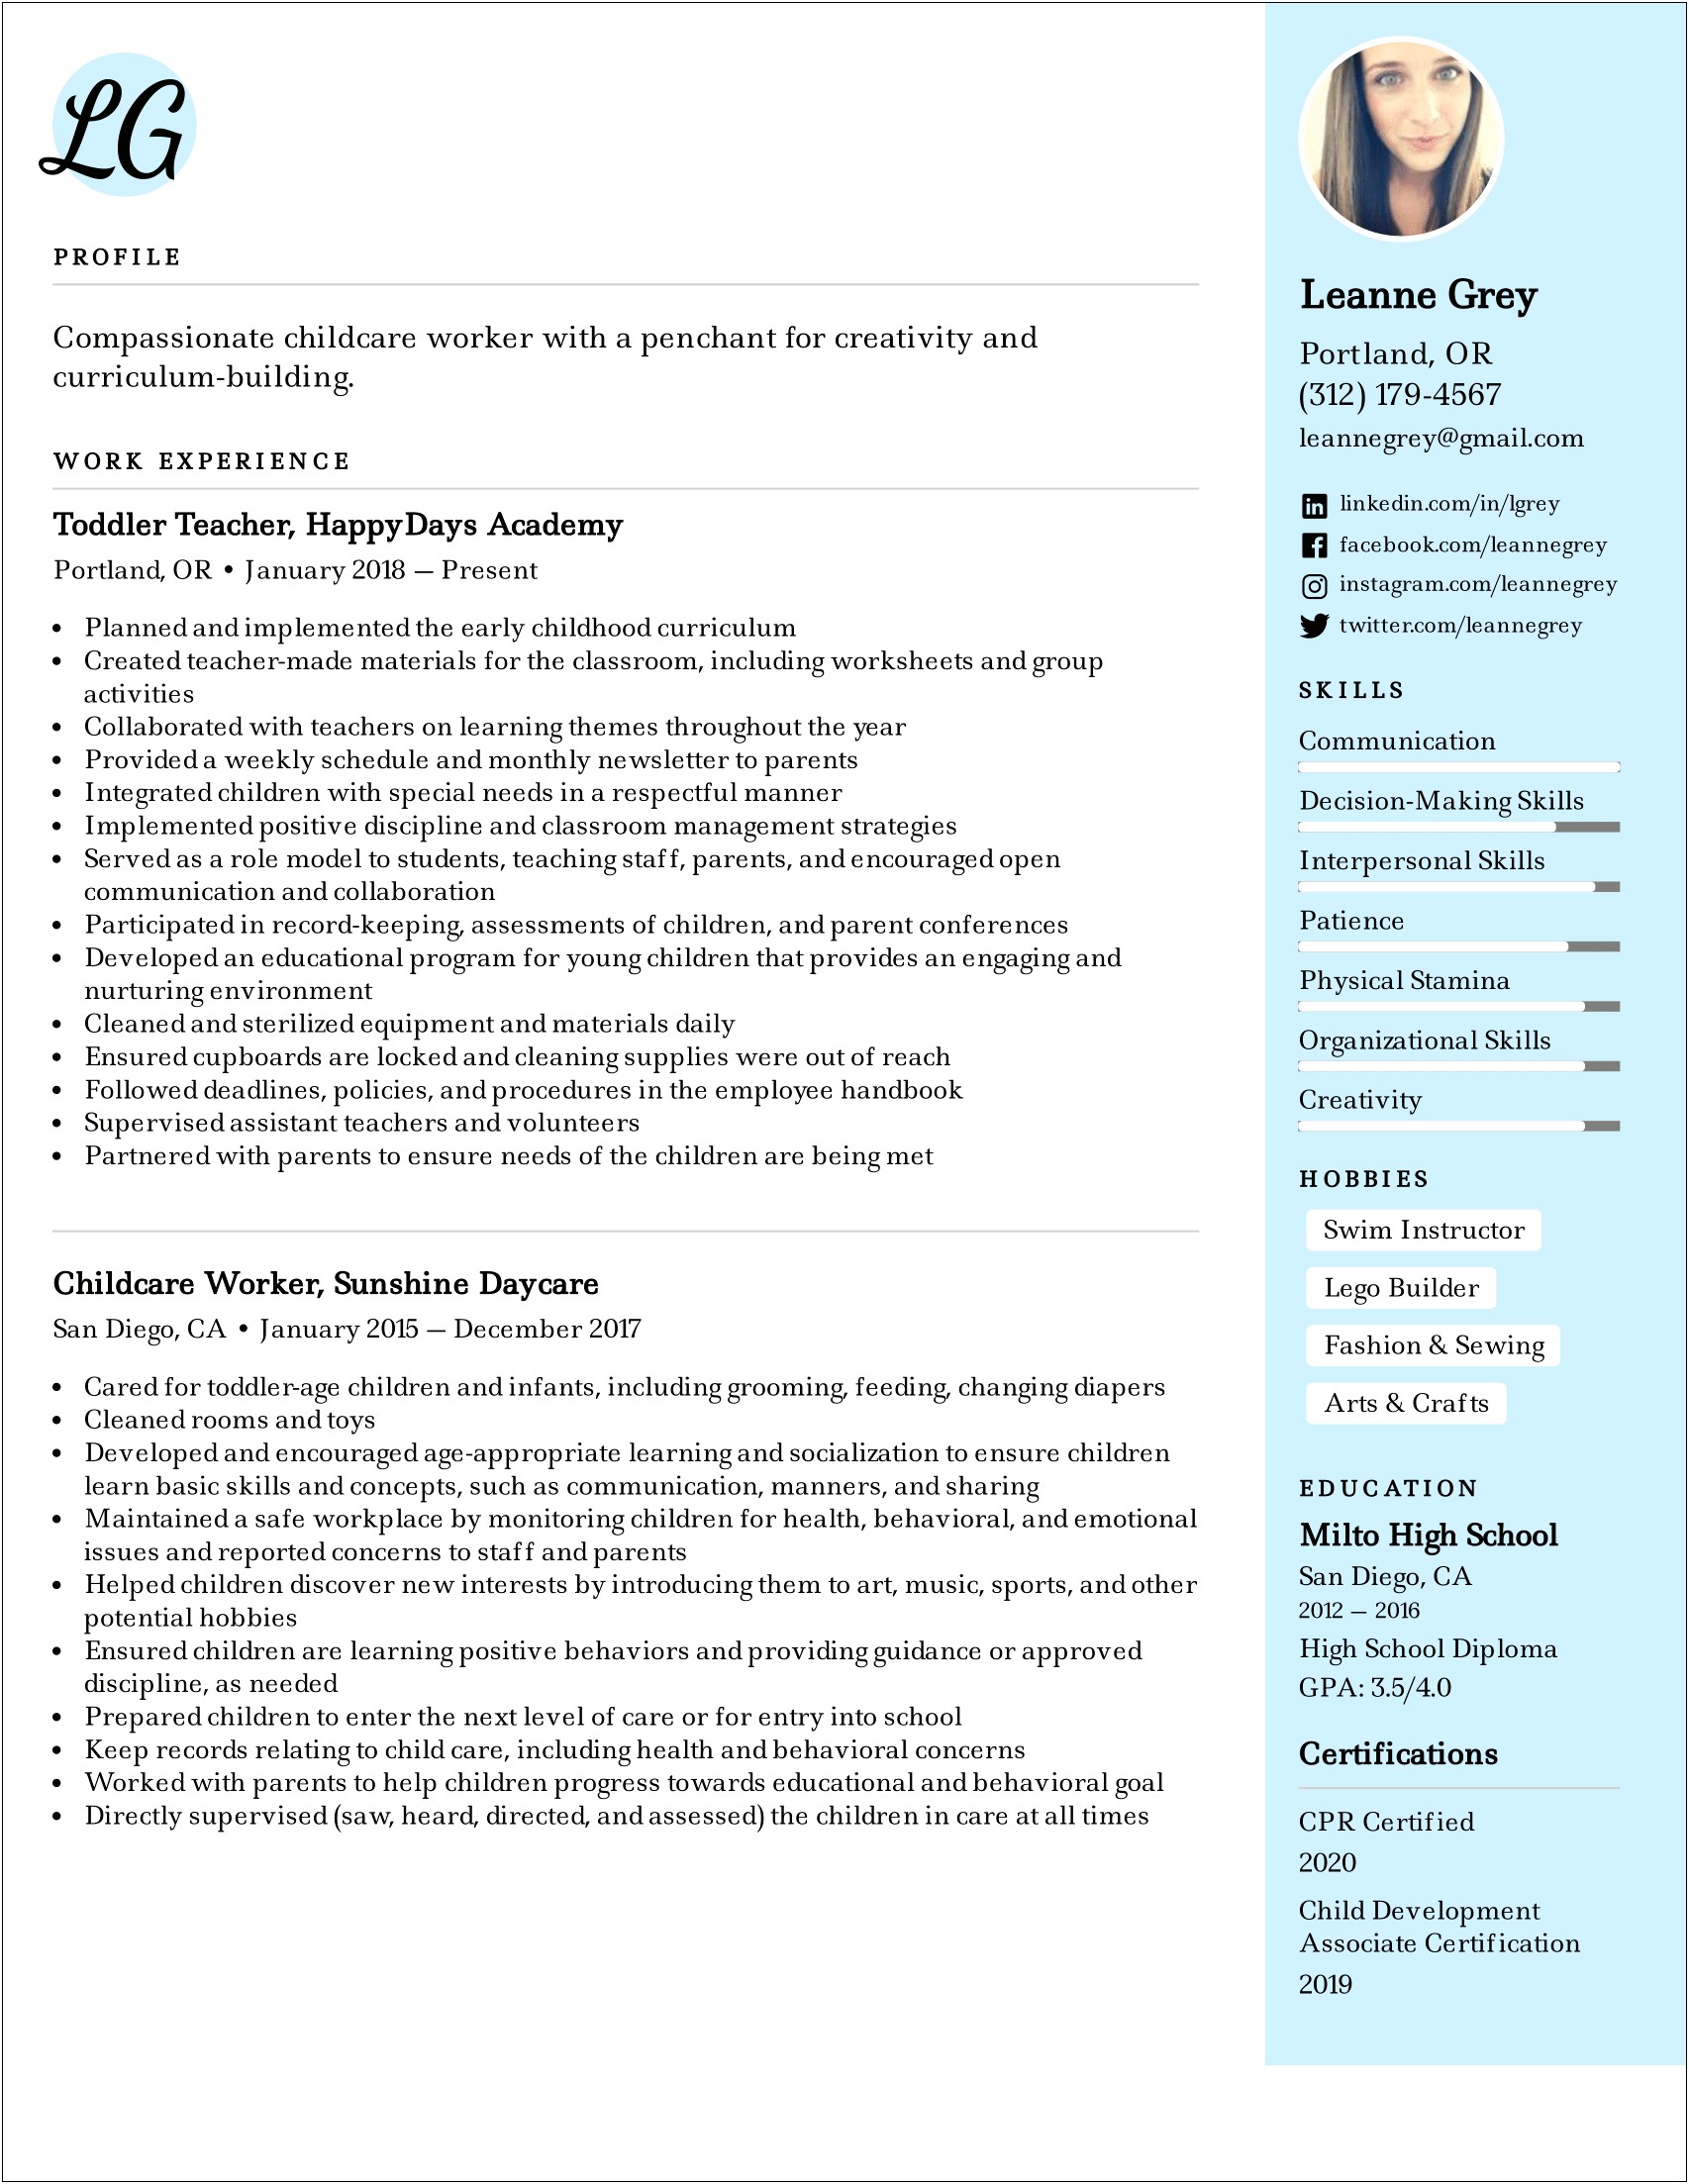 Resume Sample With Skills Section